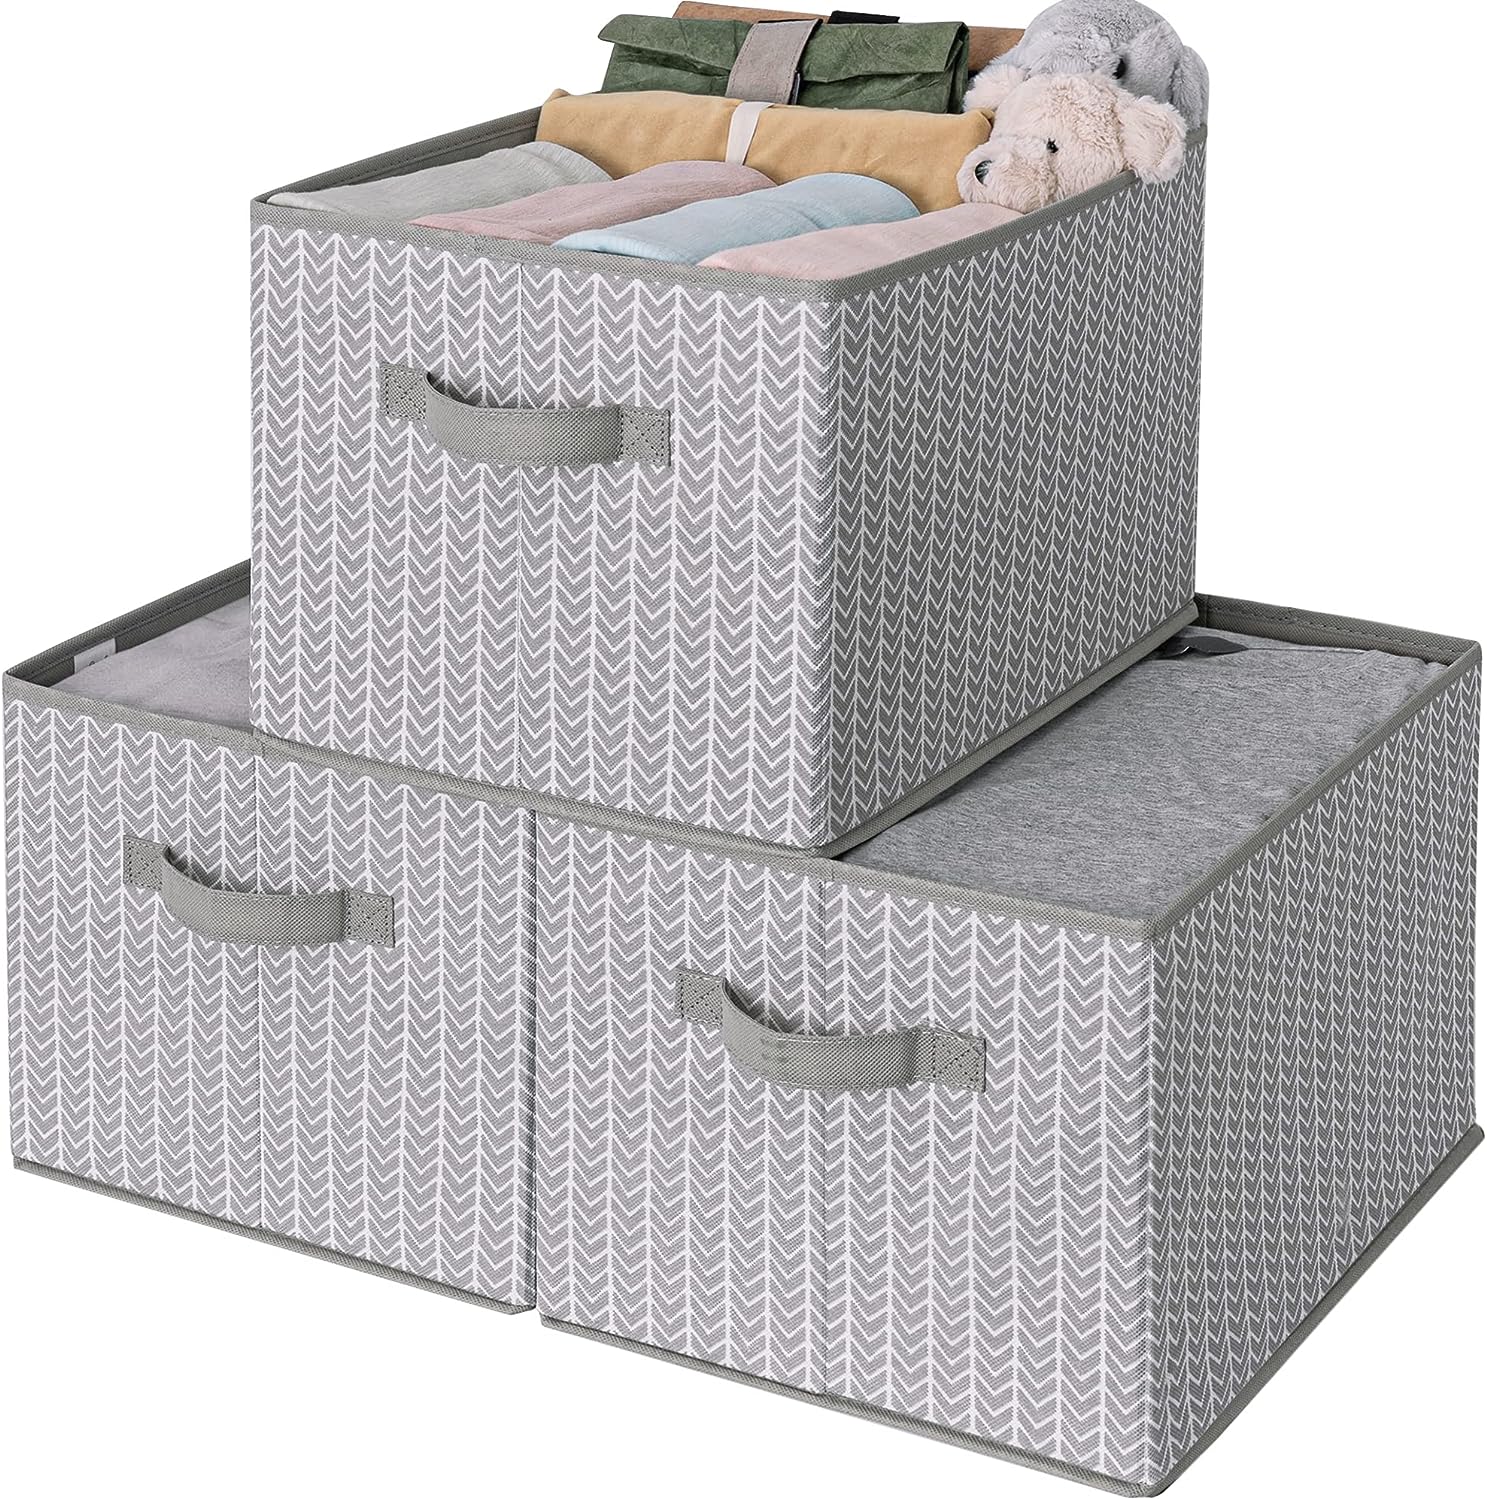 Blushbees® Collapsible Closet Storage Bins - White/Gray, 3-Pack